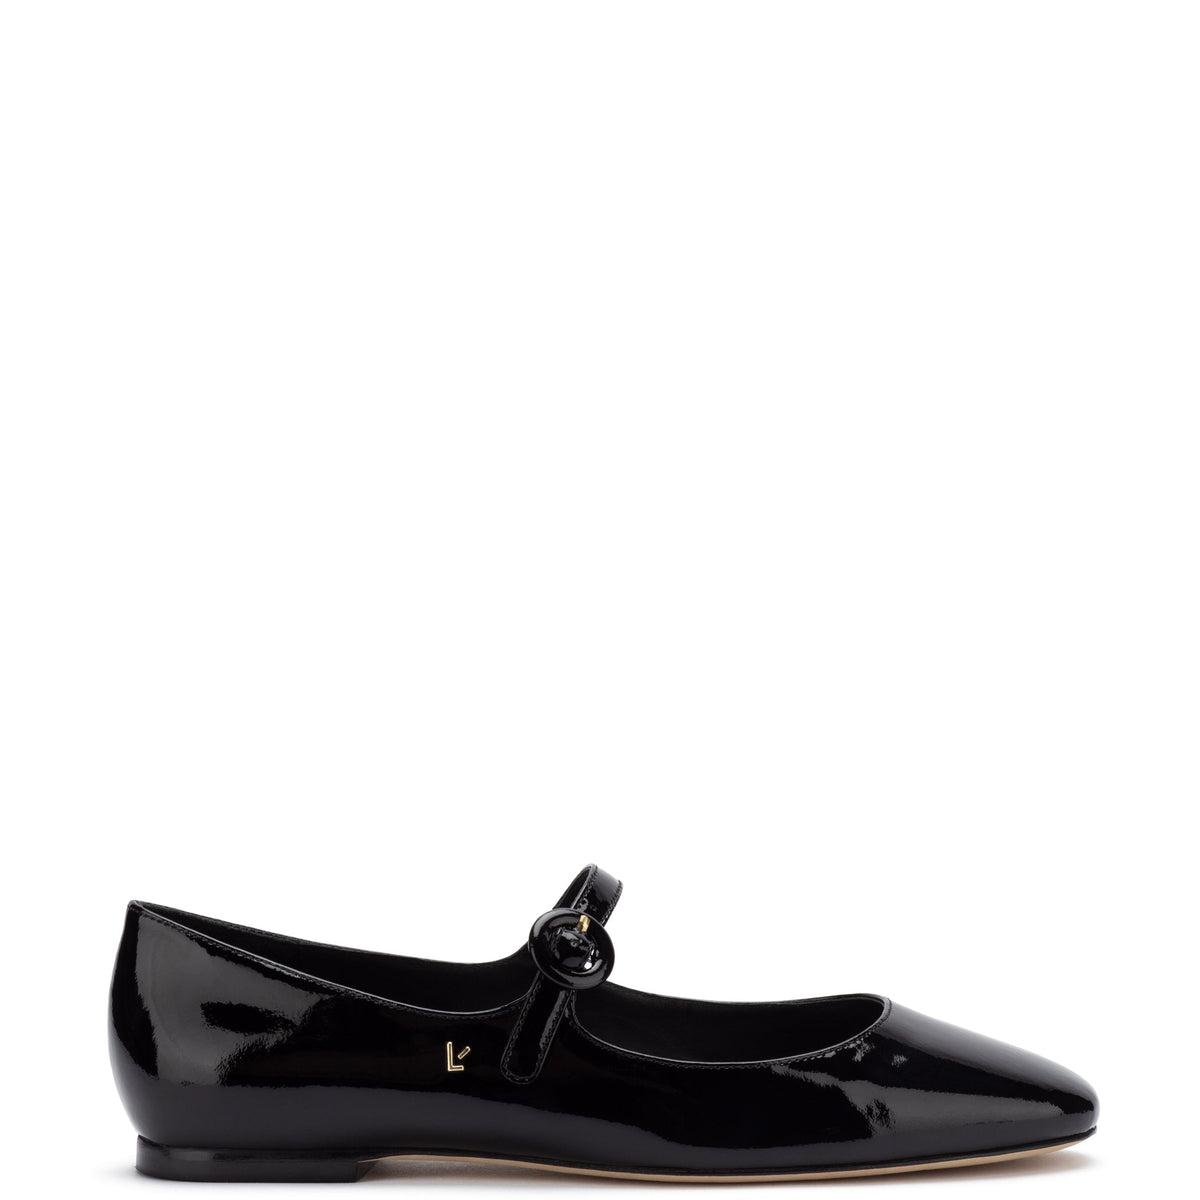 Blair Ballet Flat In Black Patent Leather